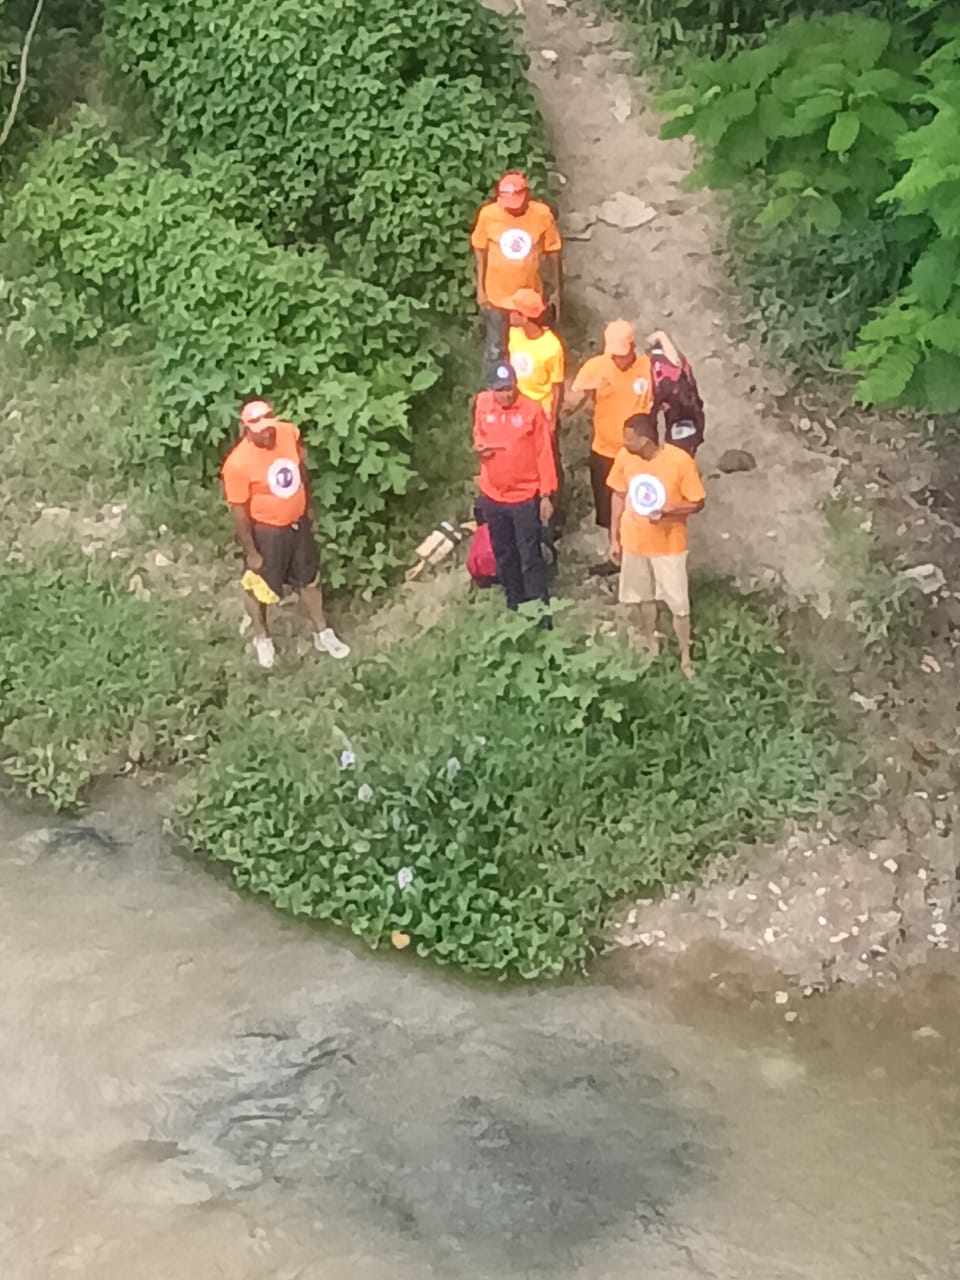 Civil Defense is looking for a man who allegedly jumped off the bridge Hermanos Patiño